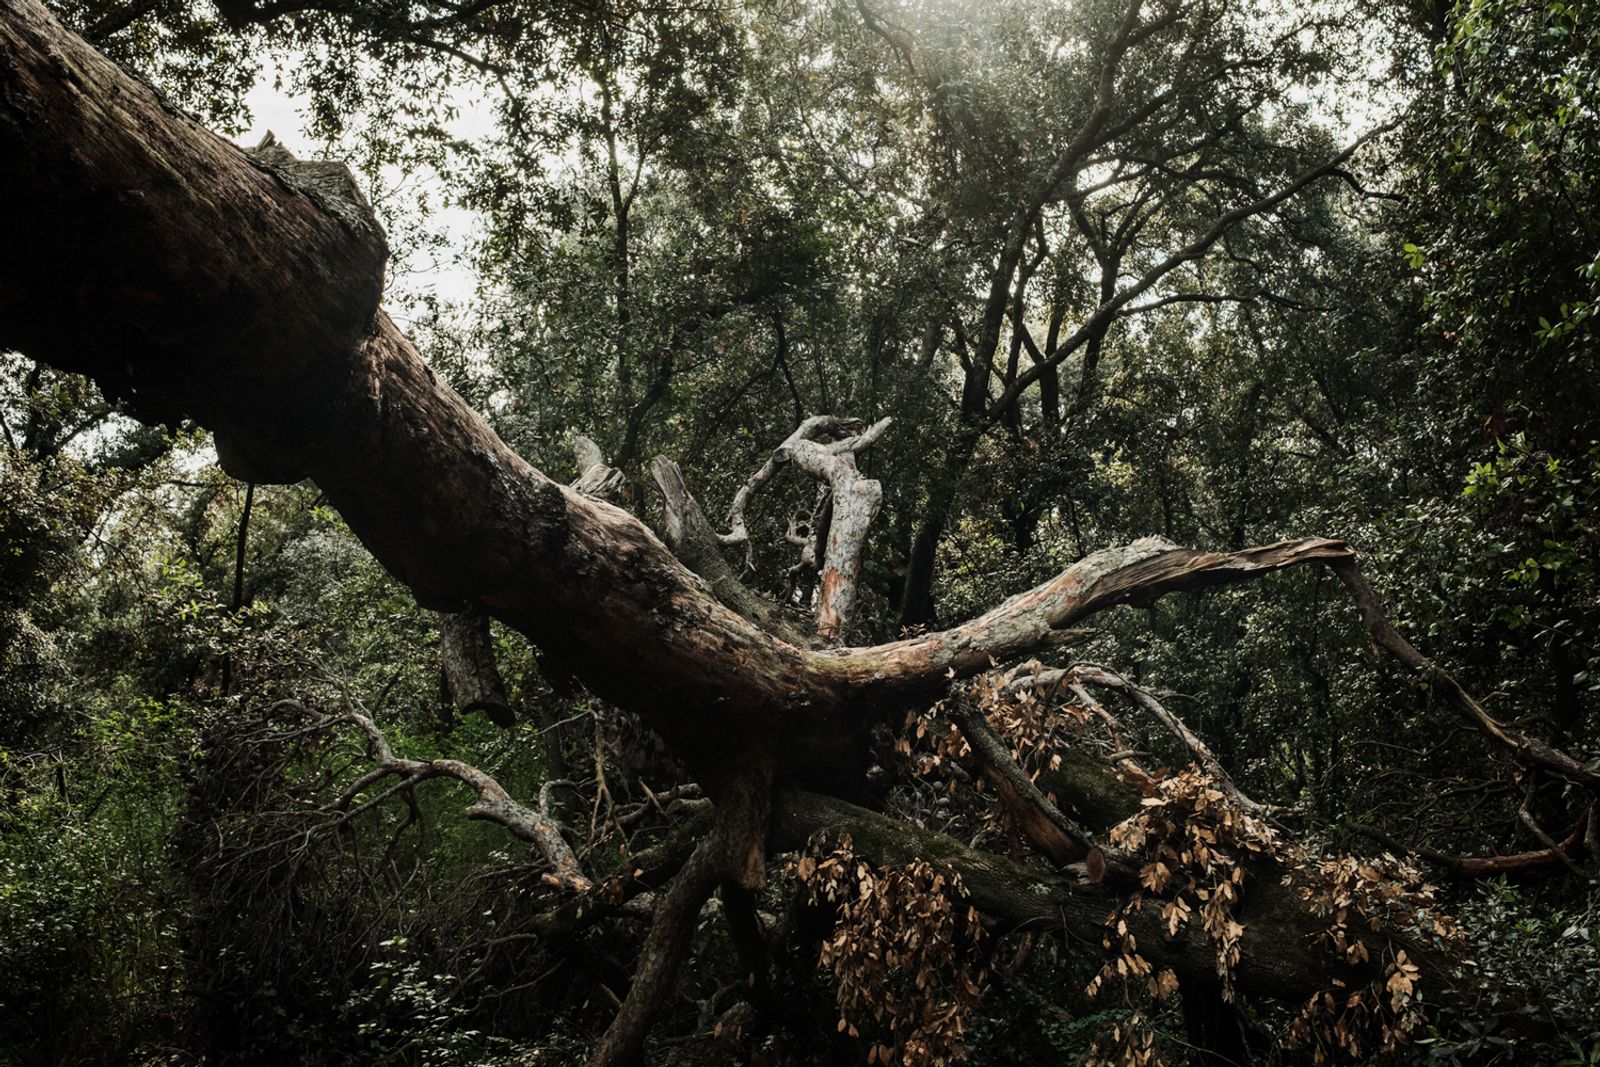 © Claire Power - A tree from the estate of the Royal Borbonic Palace in Portici fallen after a powerful storm.